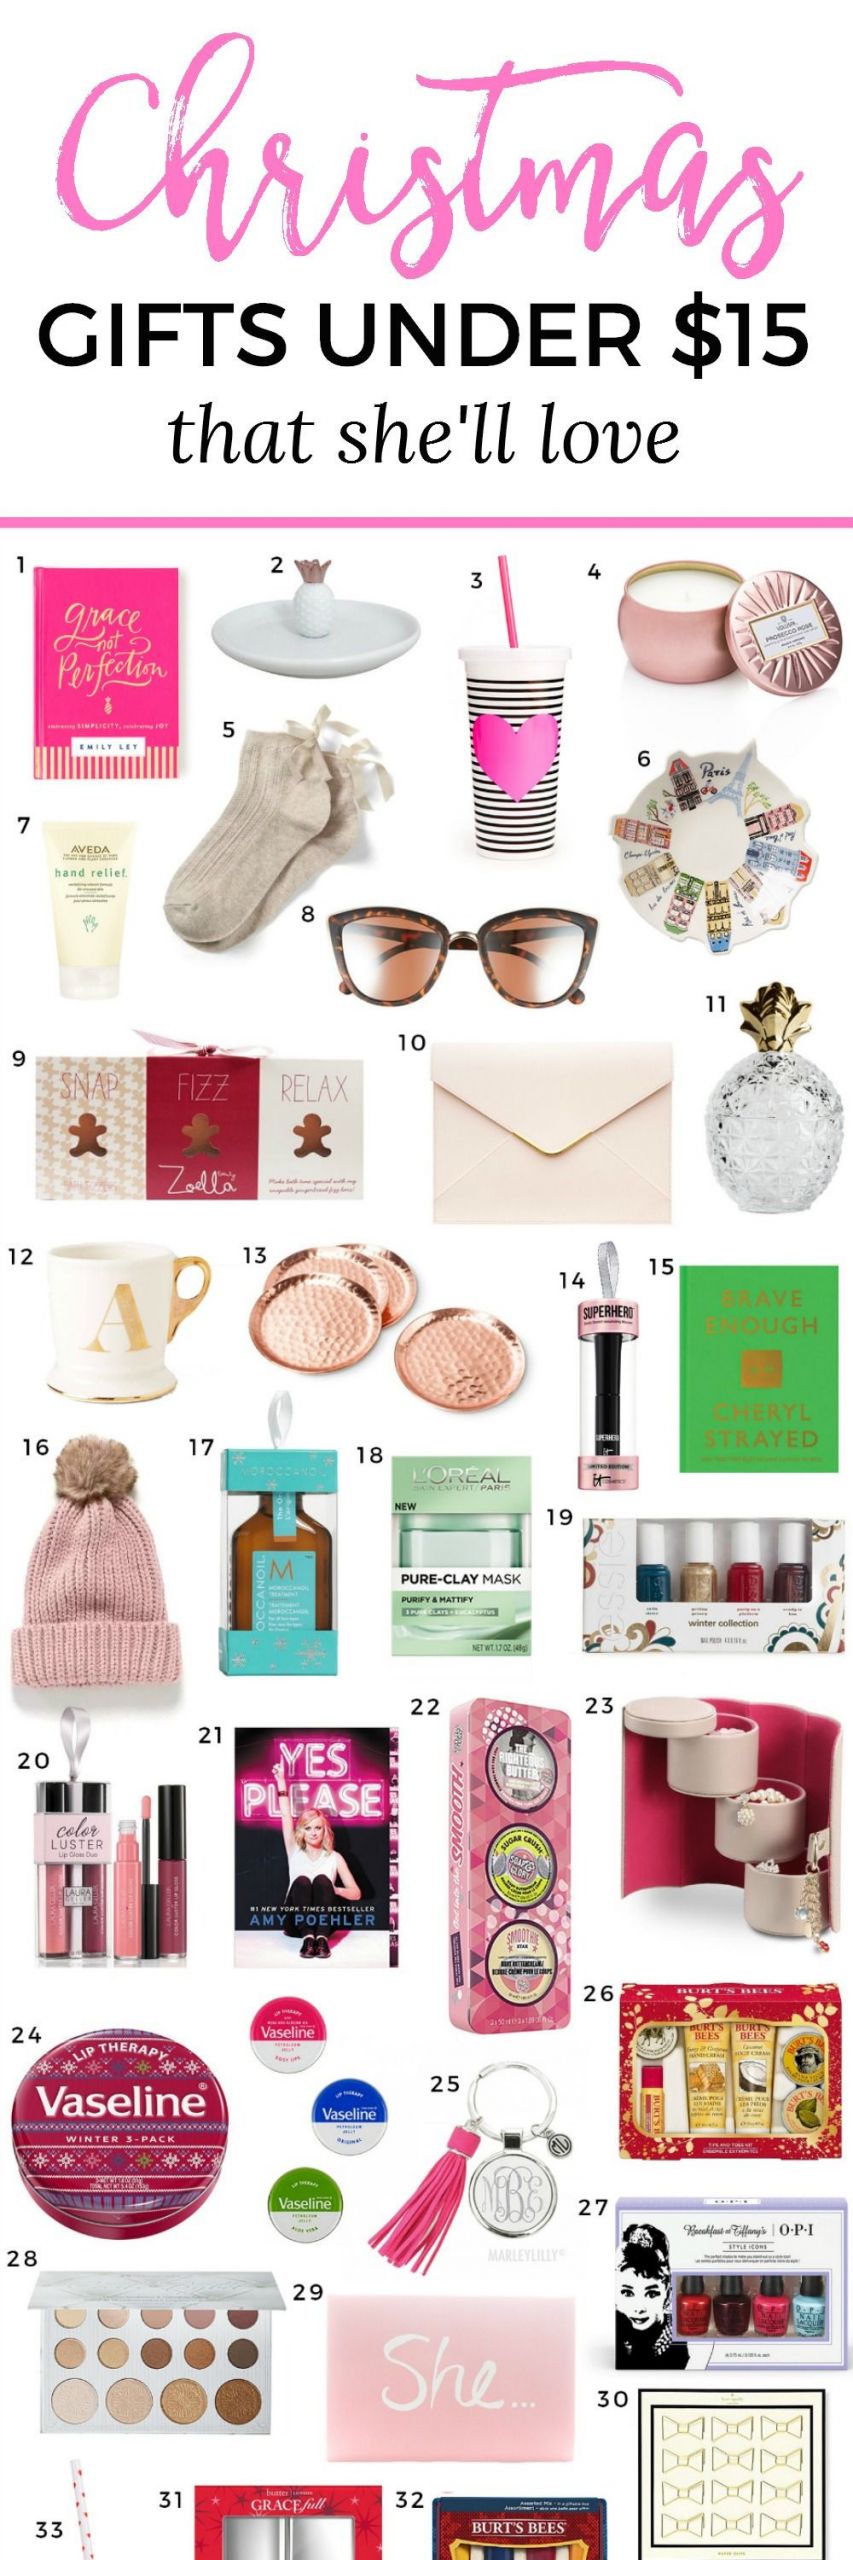 DIY Christmas Gifts For Women
 The Best Christmas Gift Ideas for Women Under $15